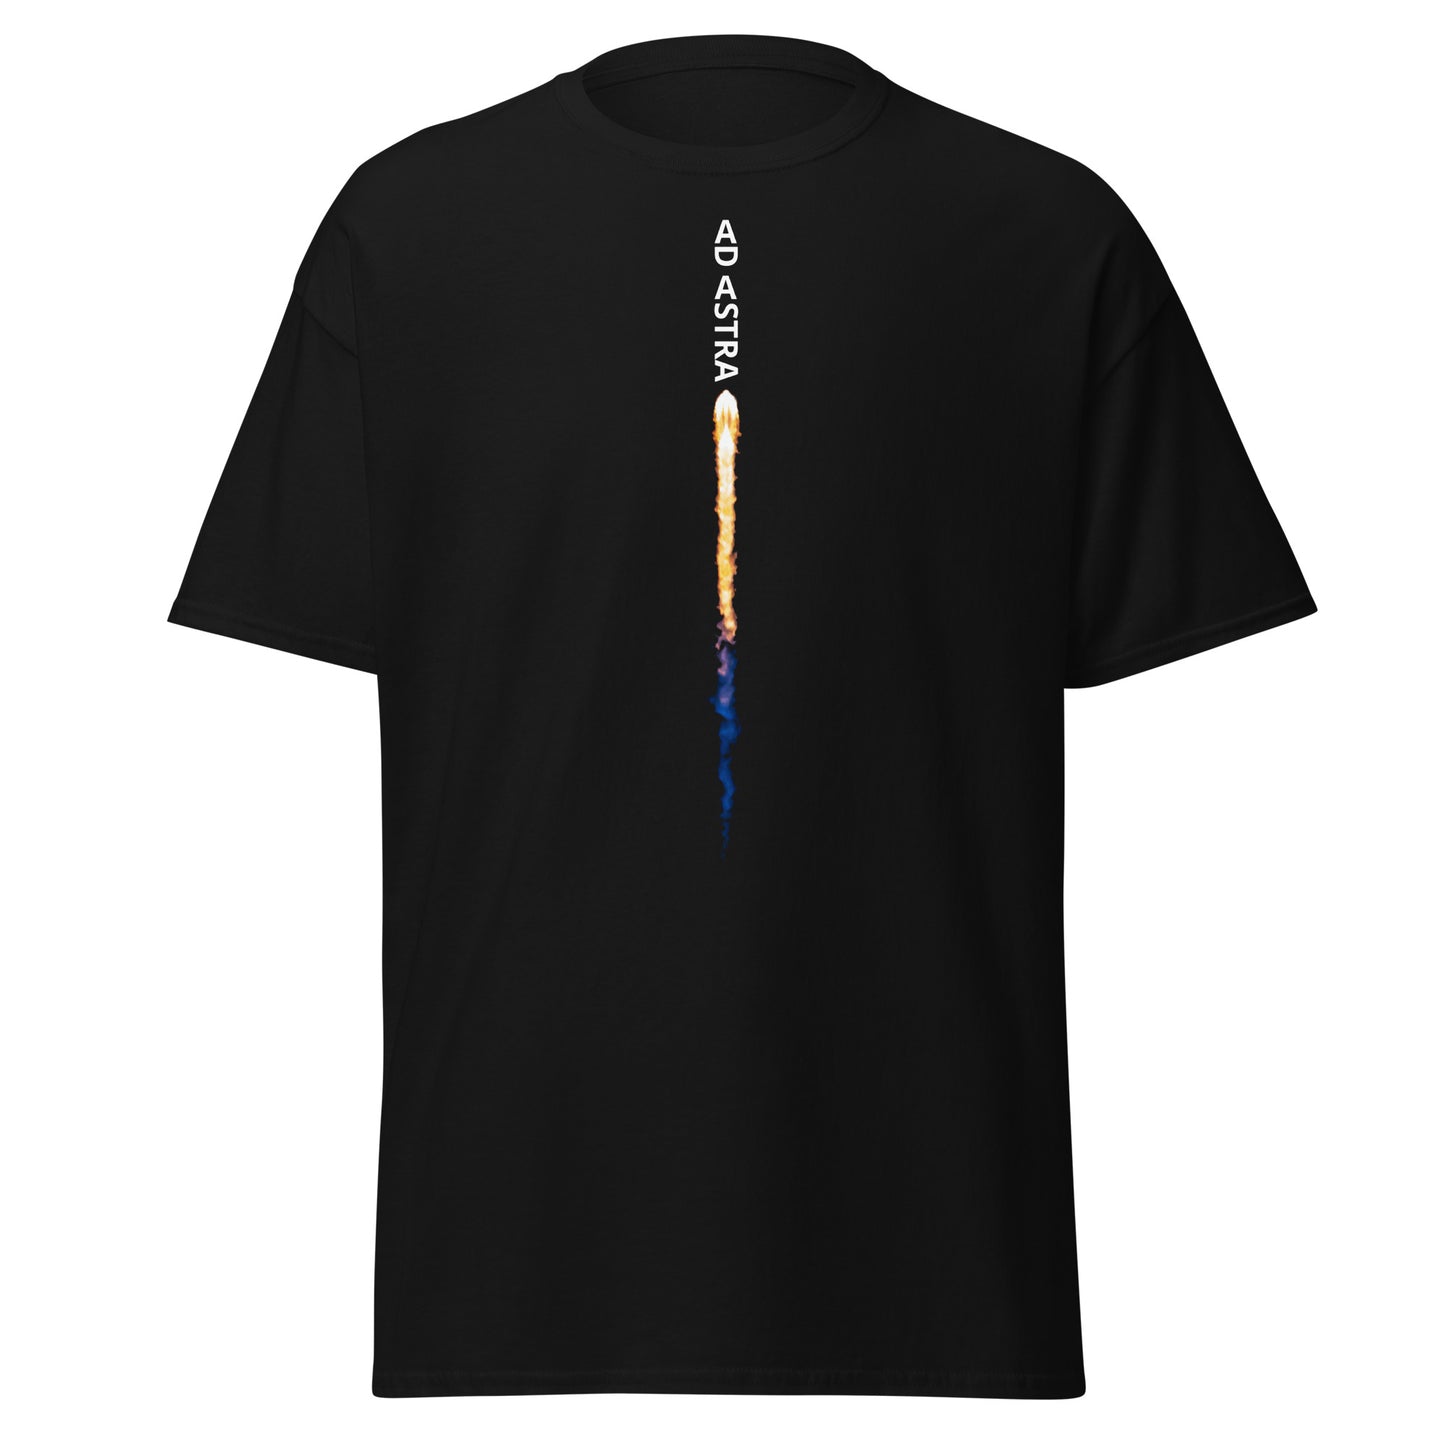 Men's classic tee - Ad Astra w/ rocket engine flame long tail